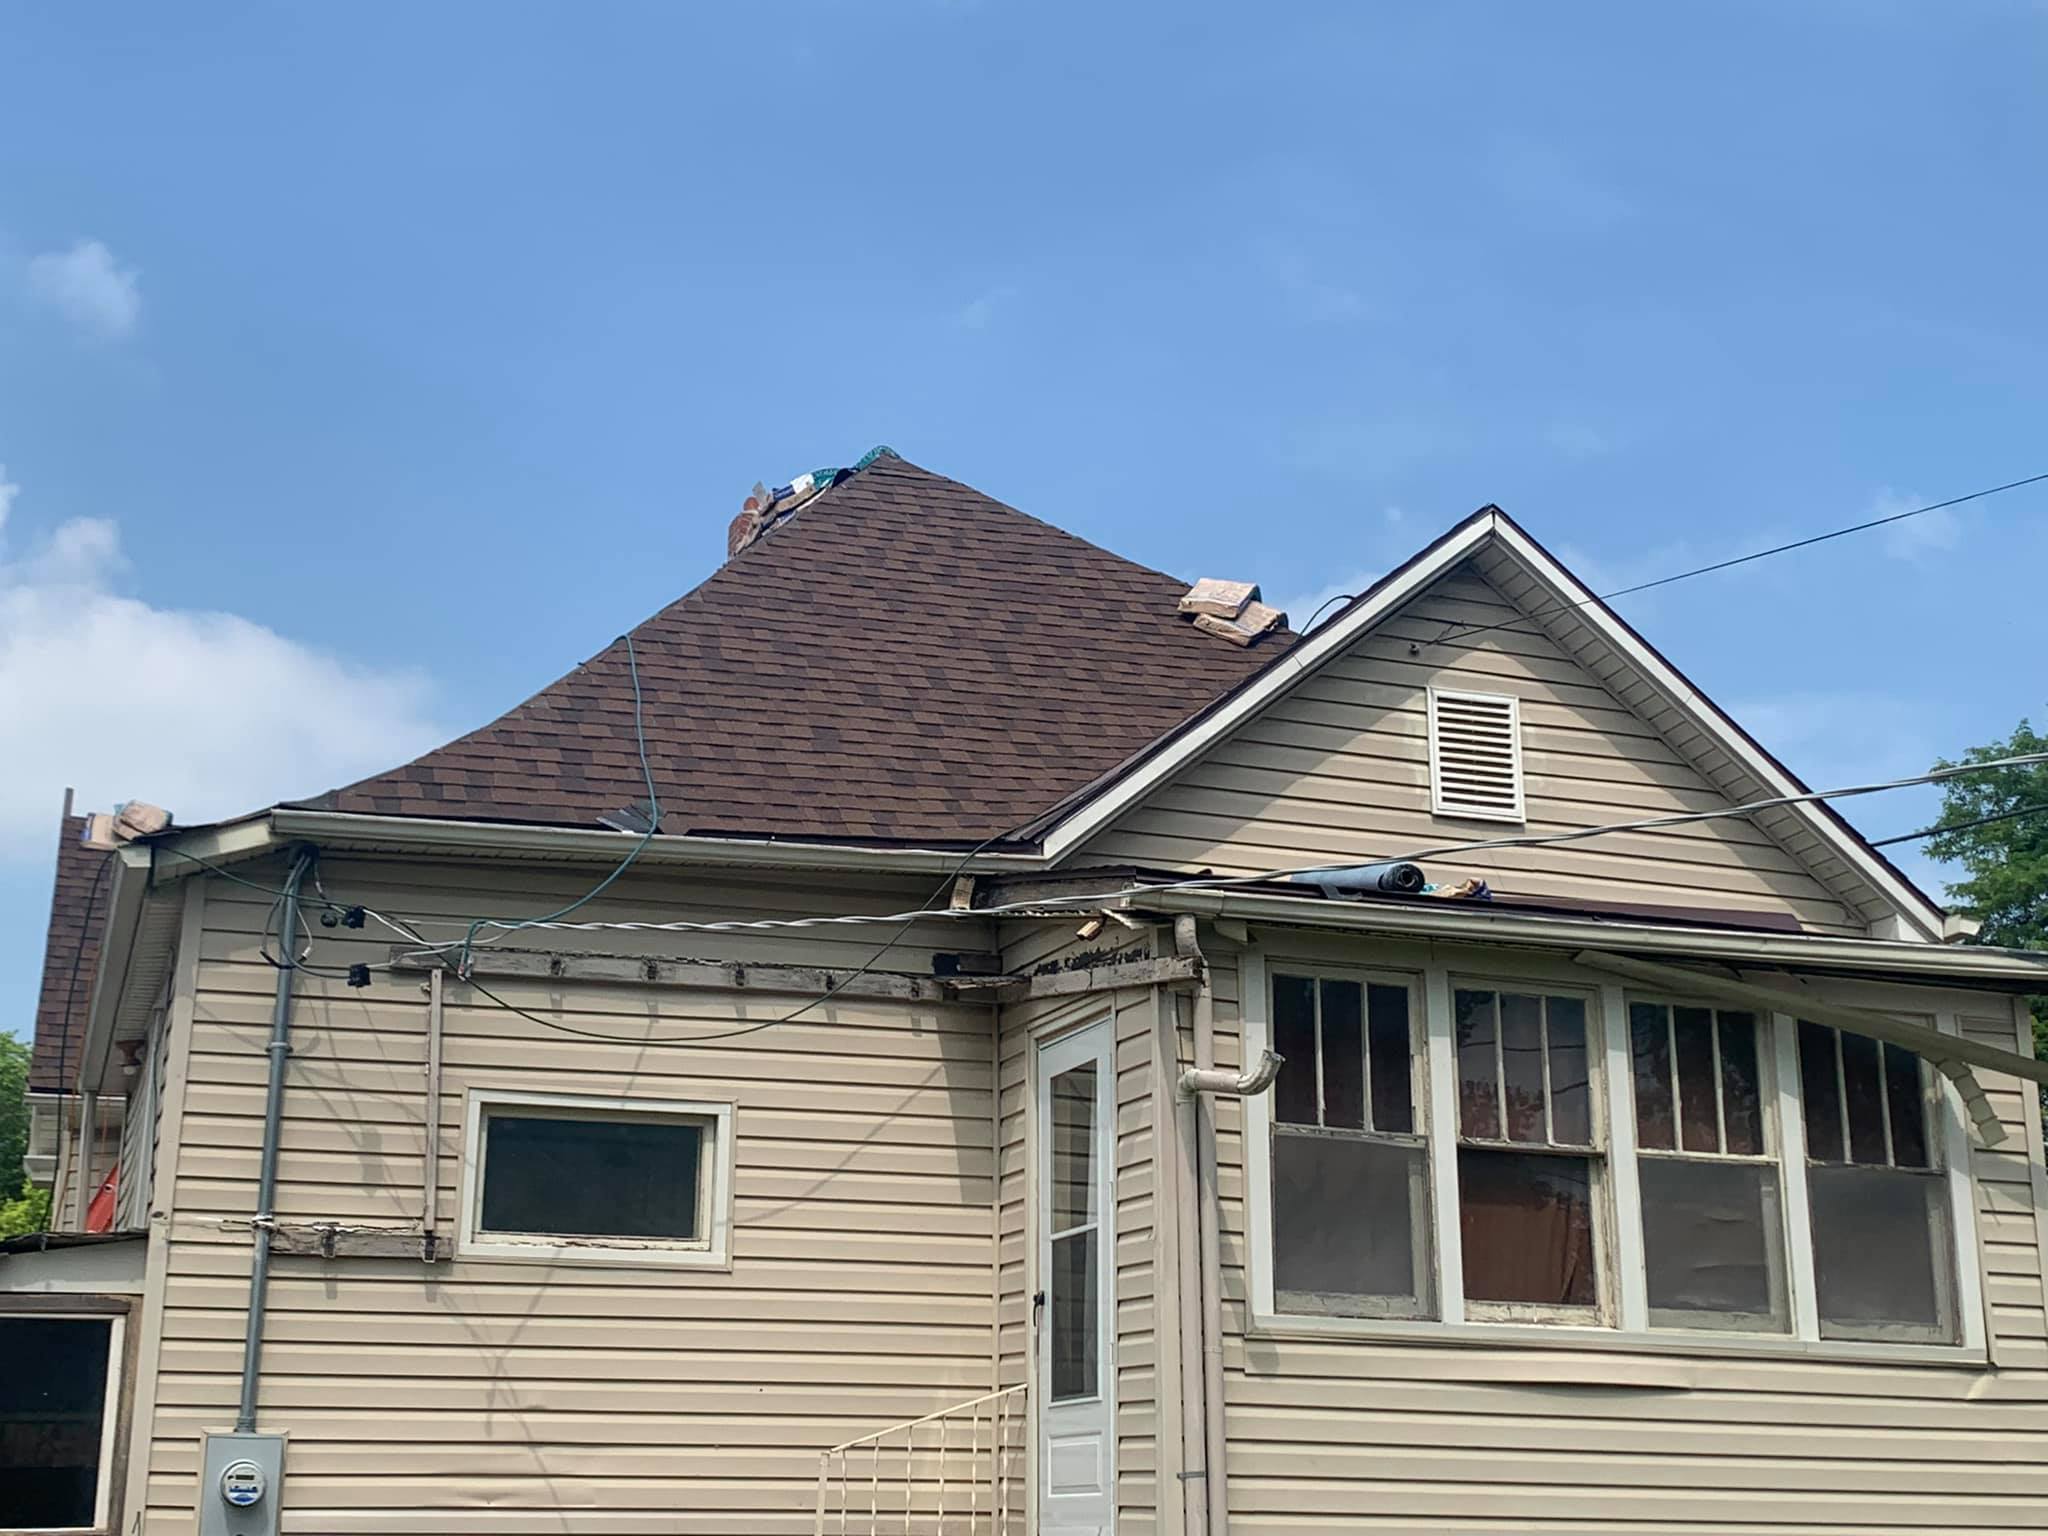 Roofing Companies Near Kearney Missouri - Things To Consider